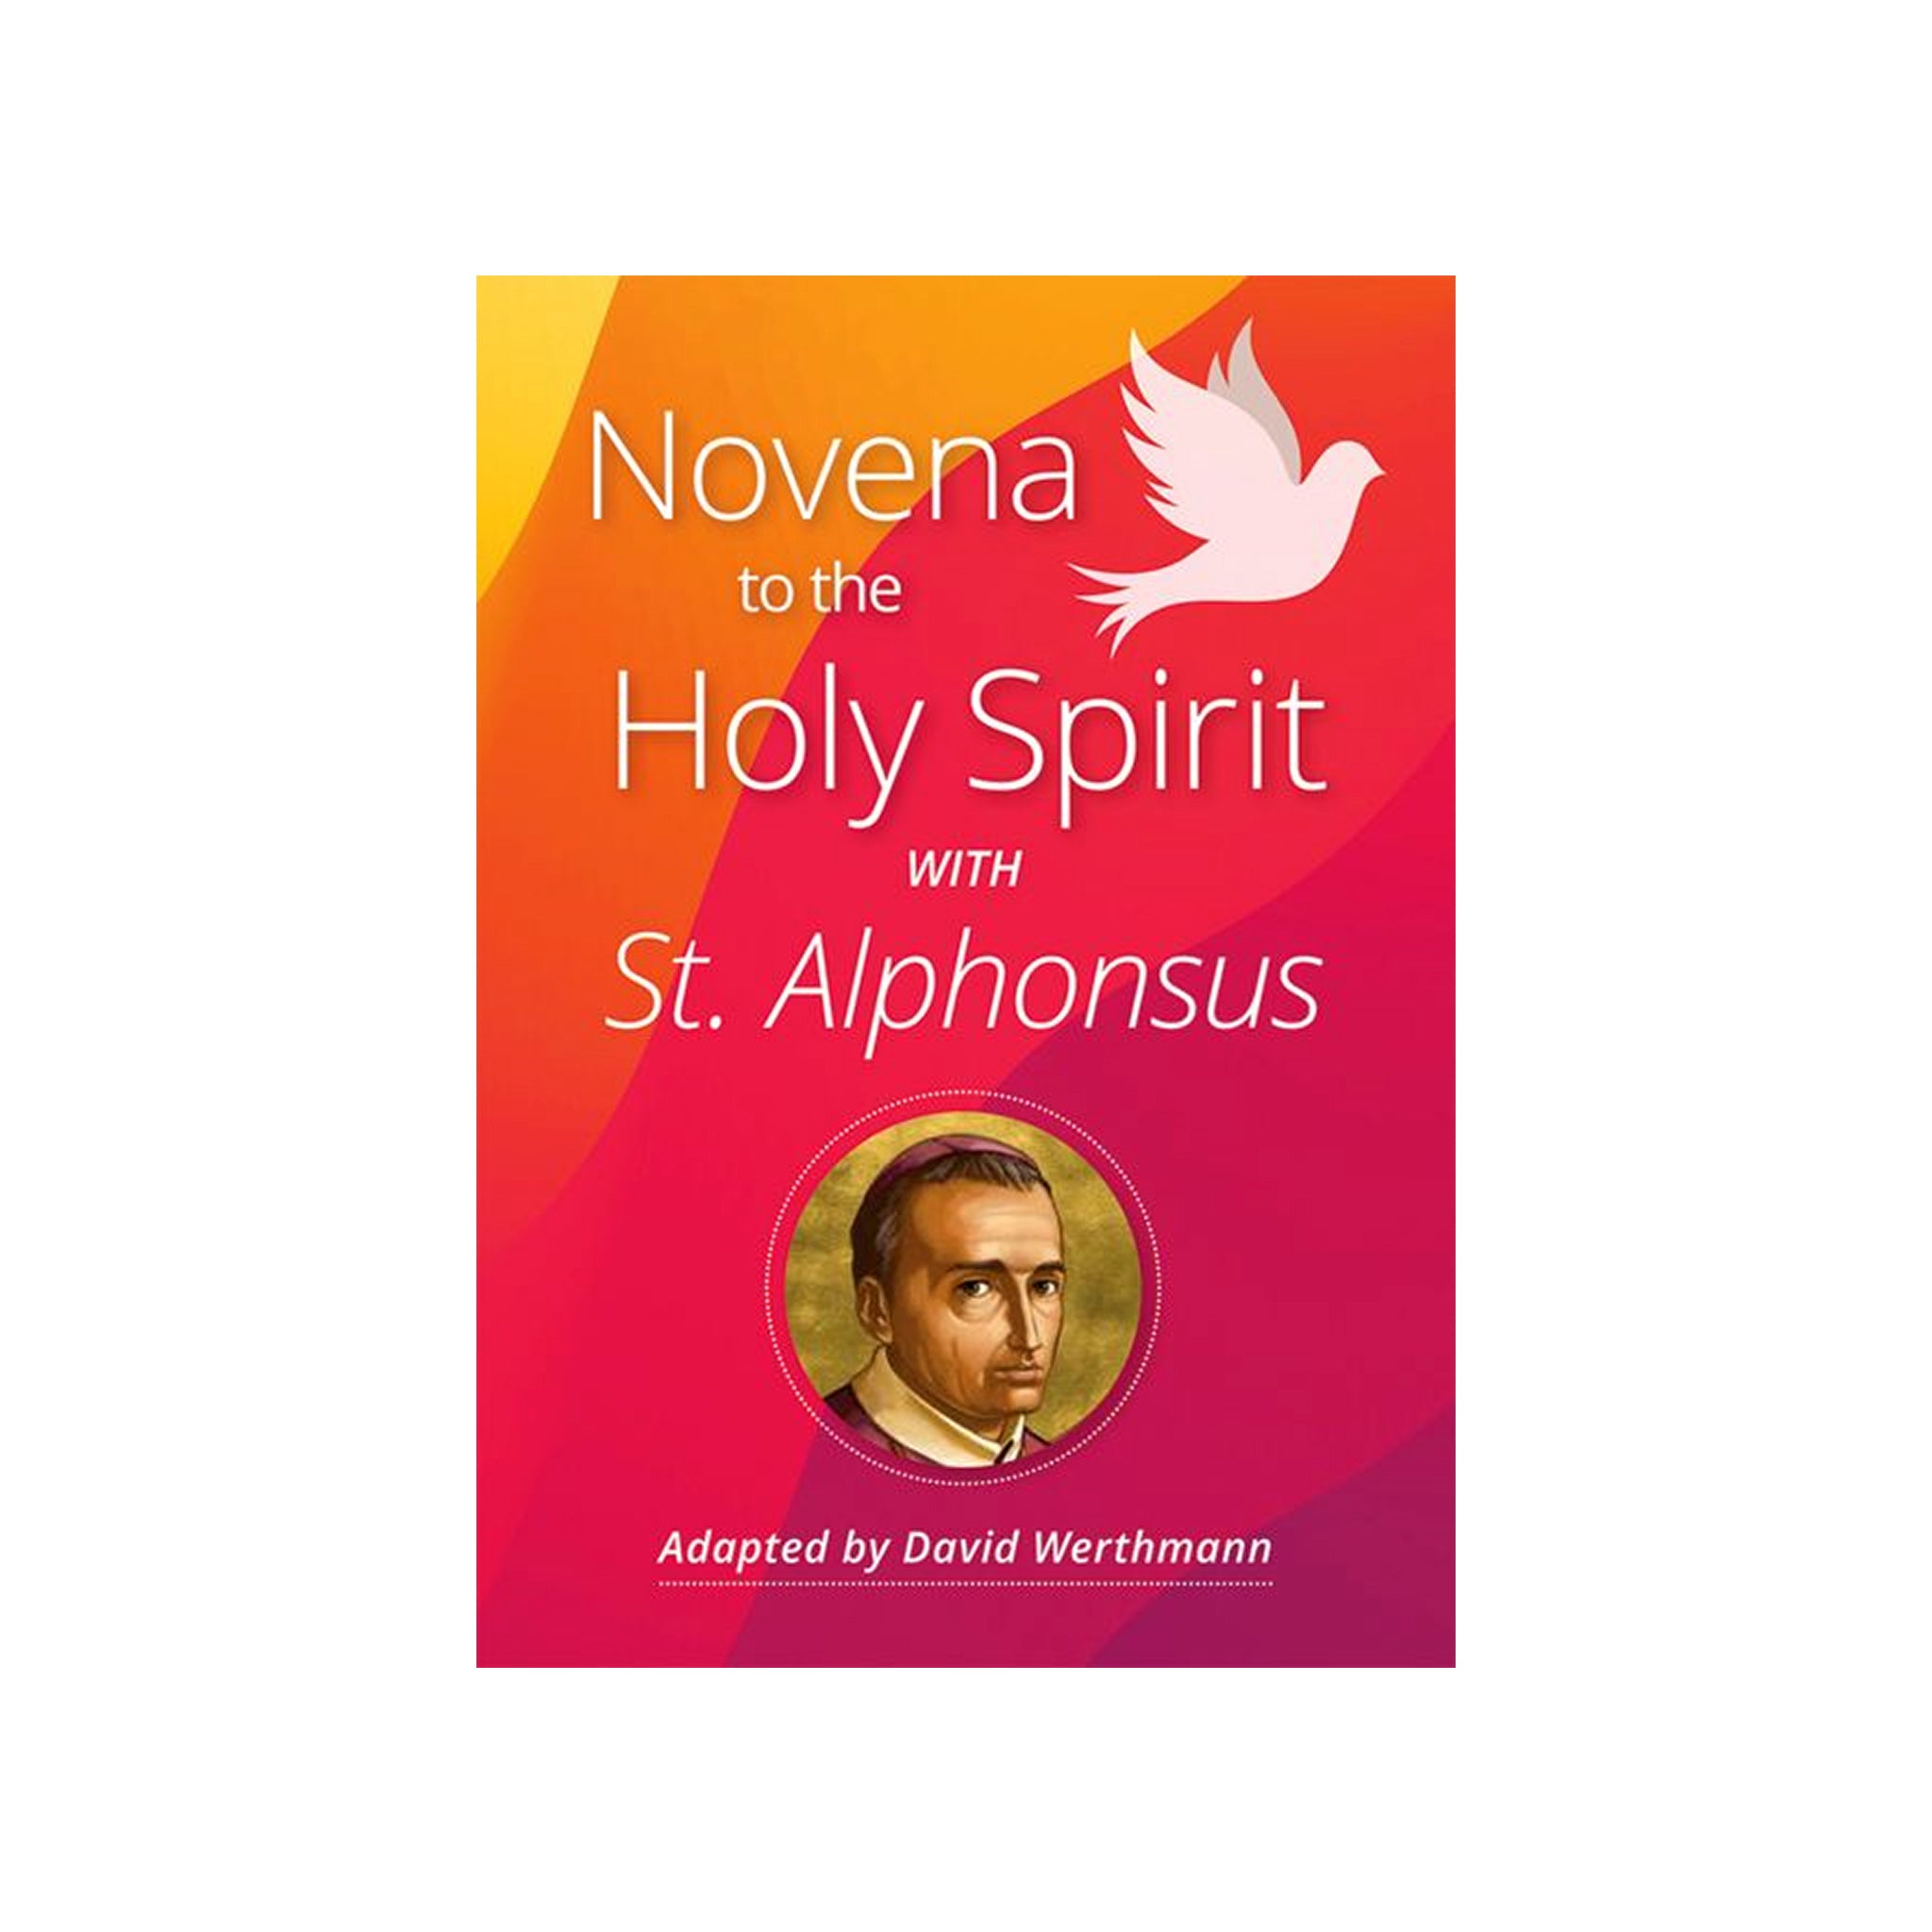 NOVENA TO THE HOLY SPIRIT WITH ST. ALPHONSUS